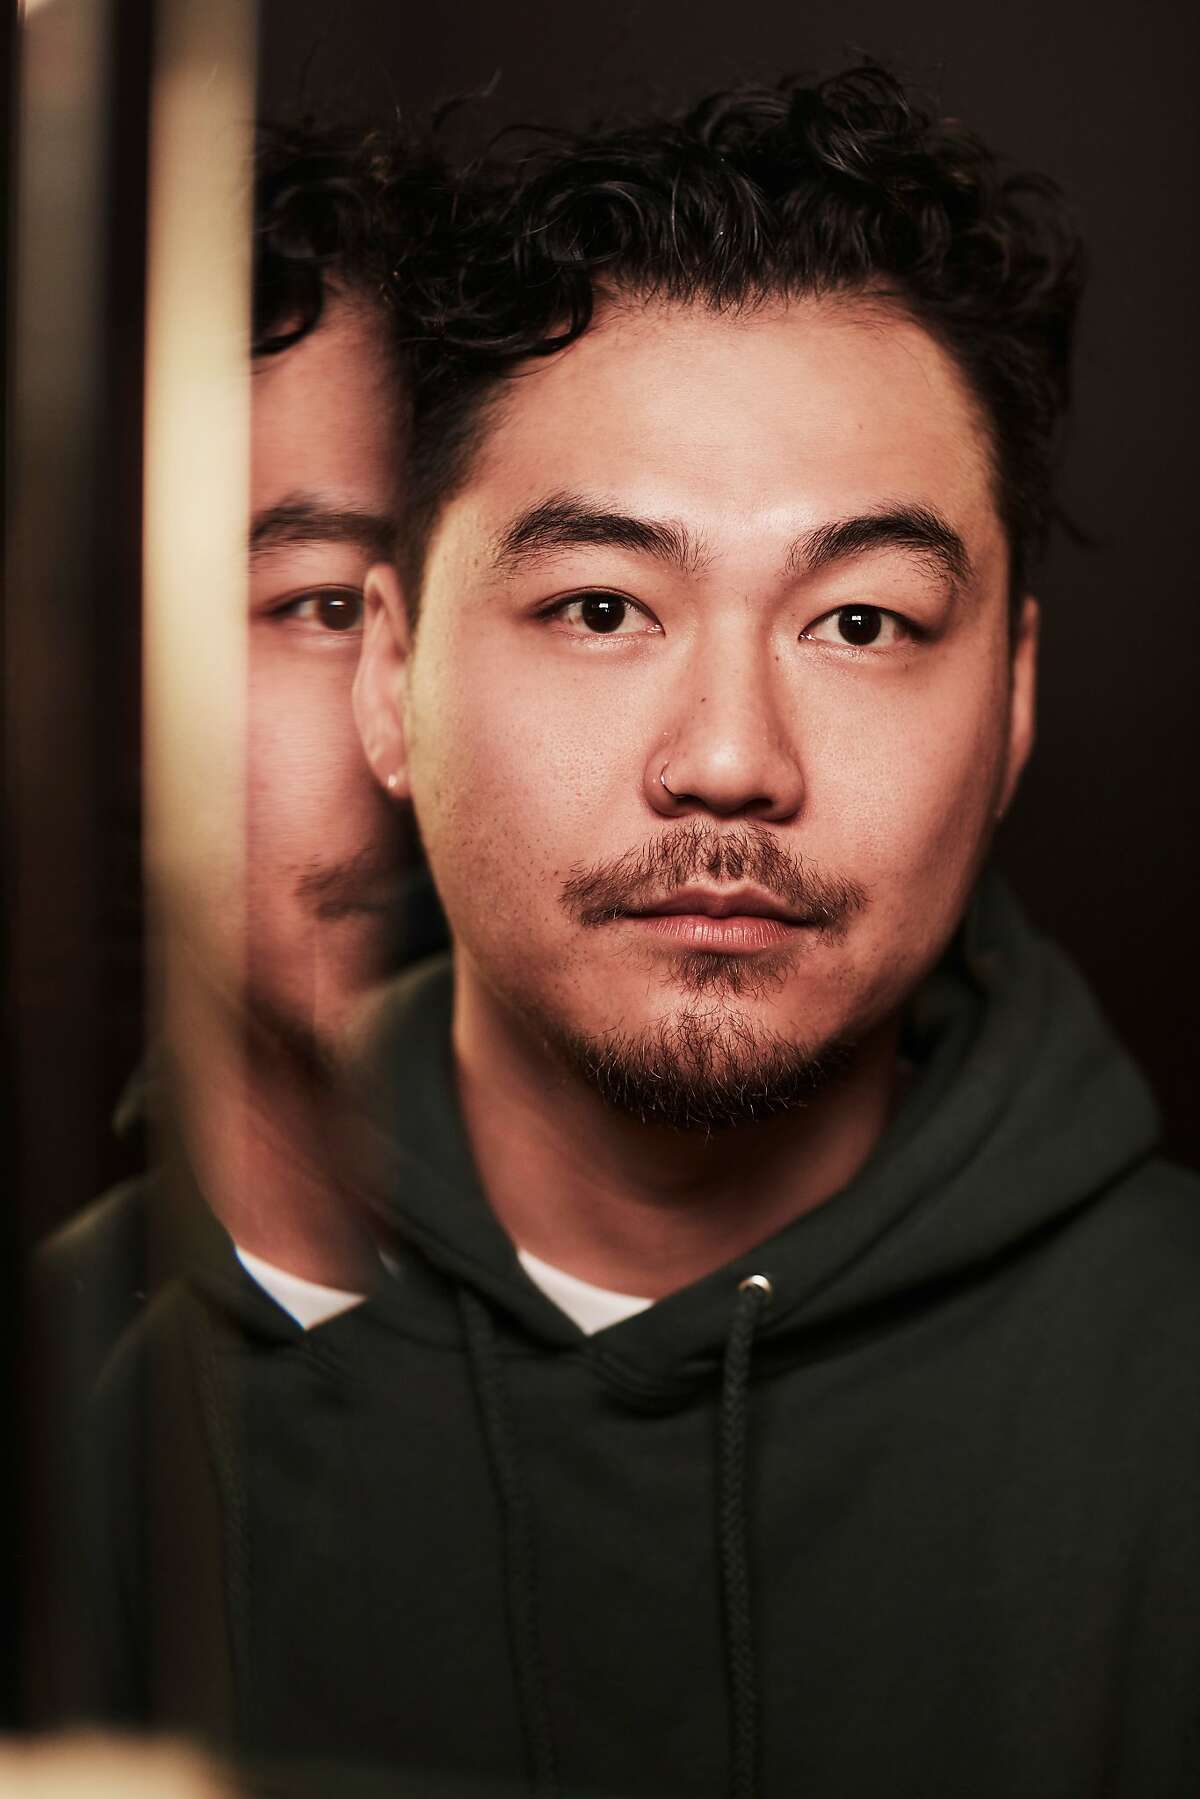 TORONTO, ON - SEPTEMBER 08: Dumbfoundead from the film 'Bodied' poses for a portrait during the 2017 Toronto International Film Festival at Intercontinental Hotel on September 8, 2017 in Toronto, Canada.